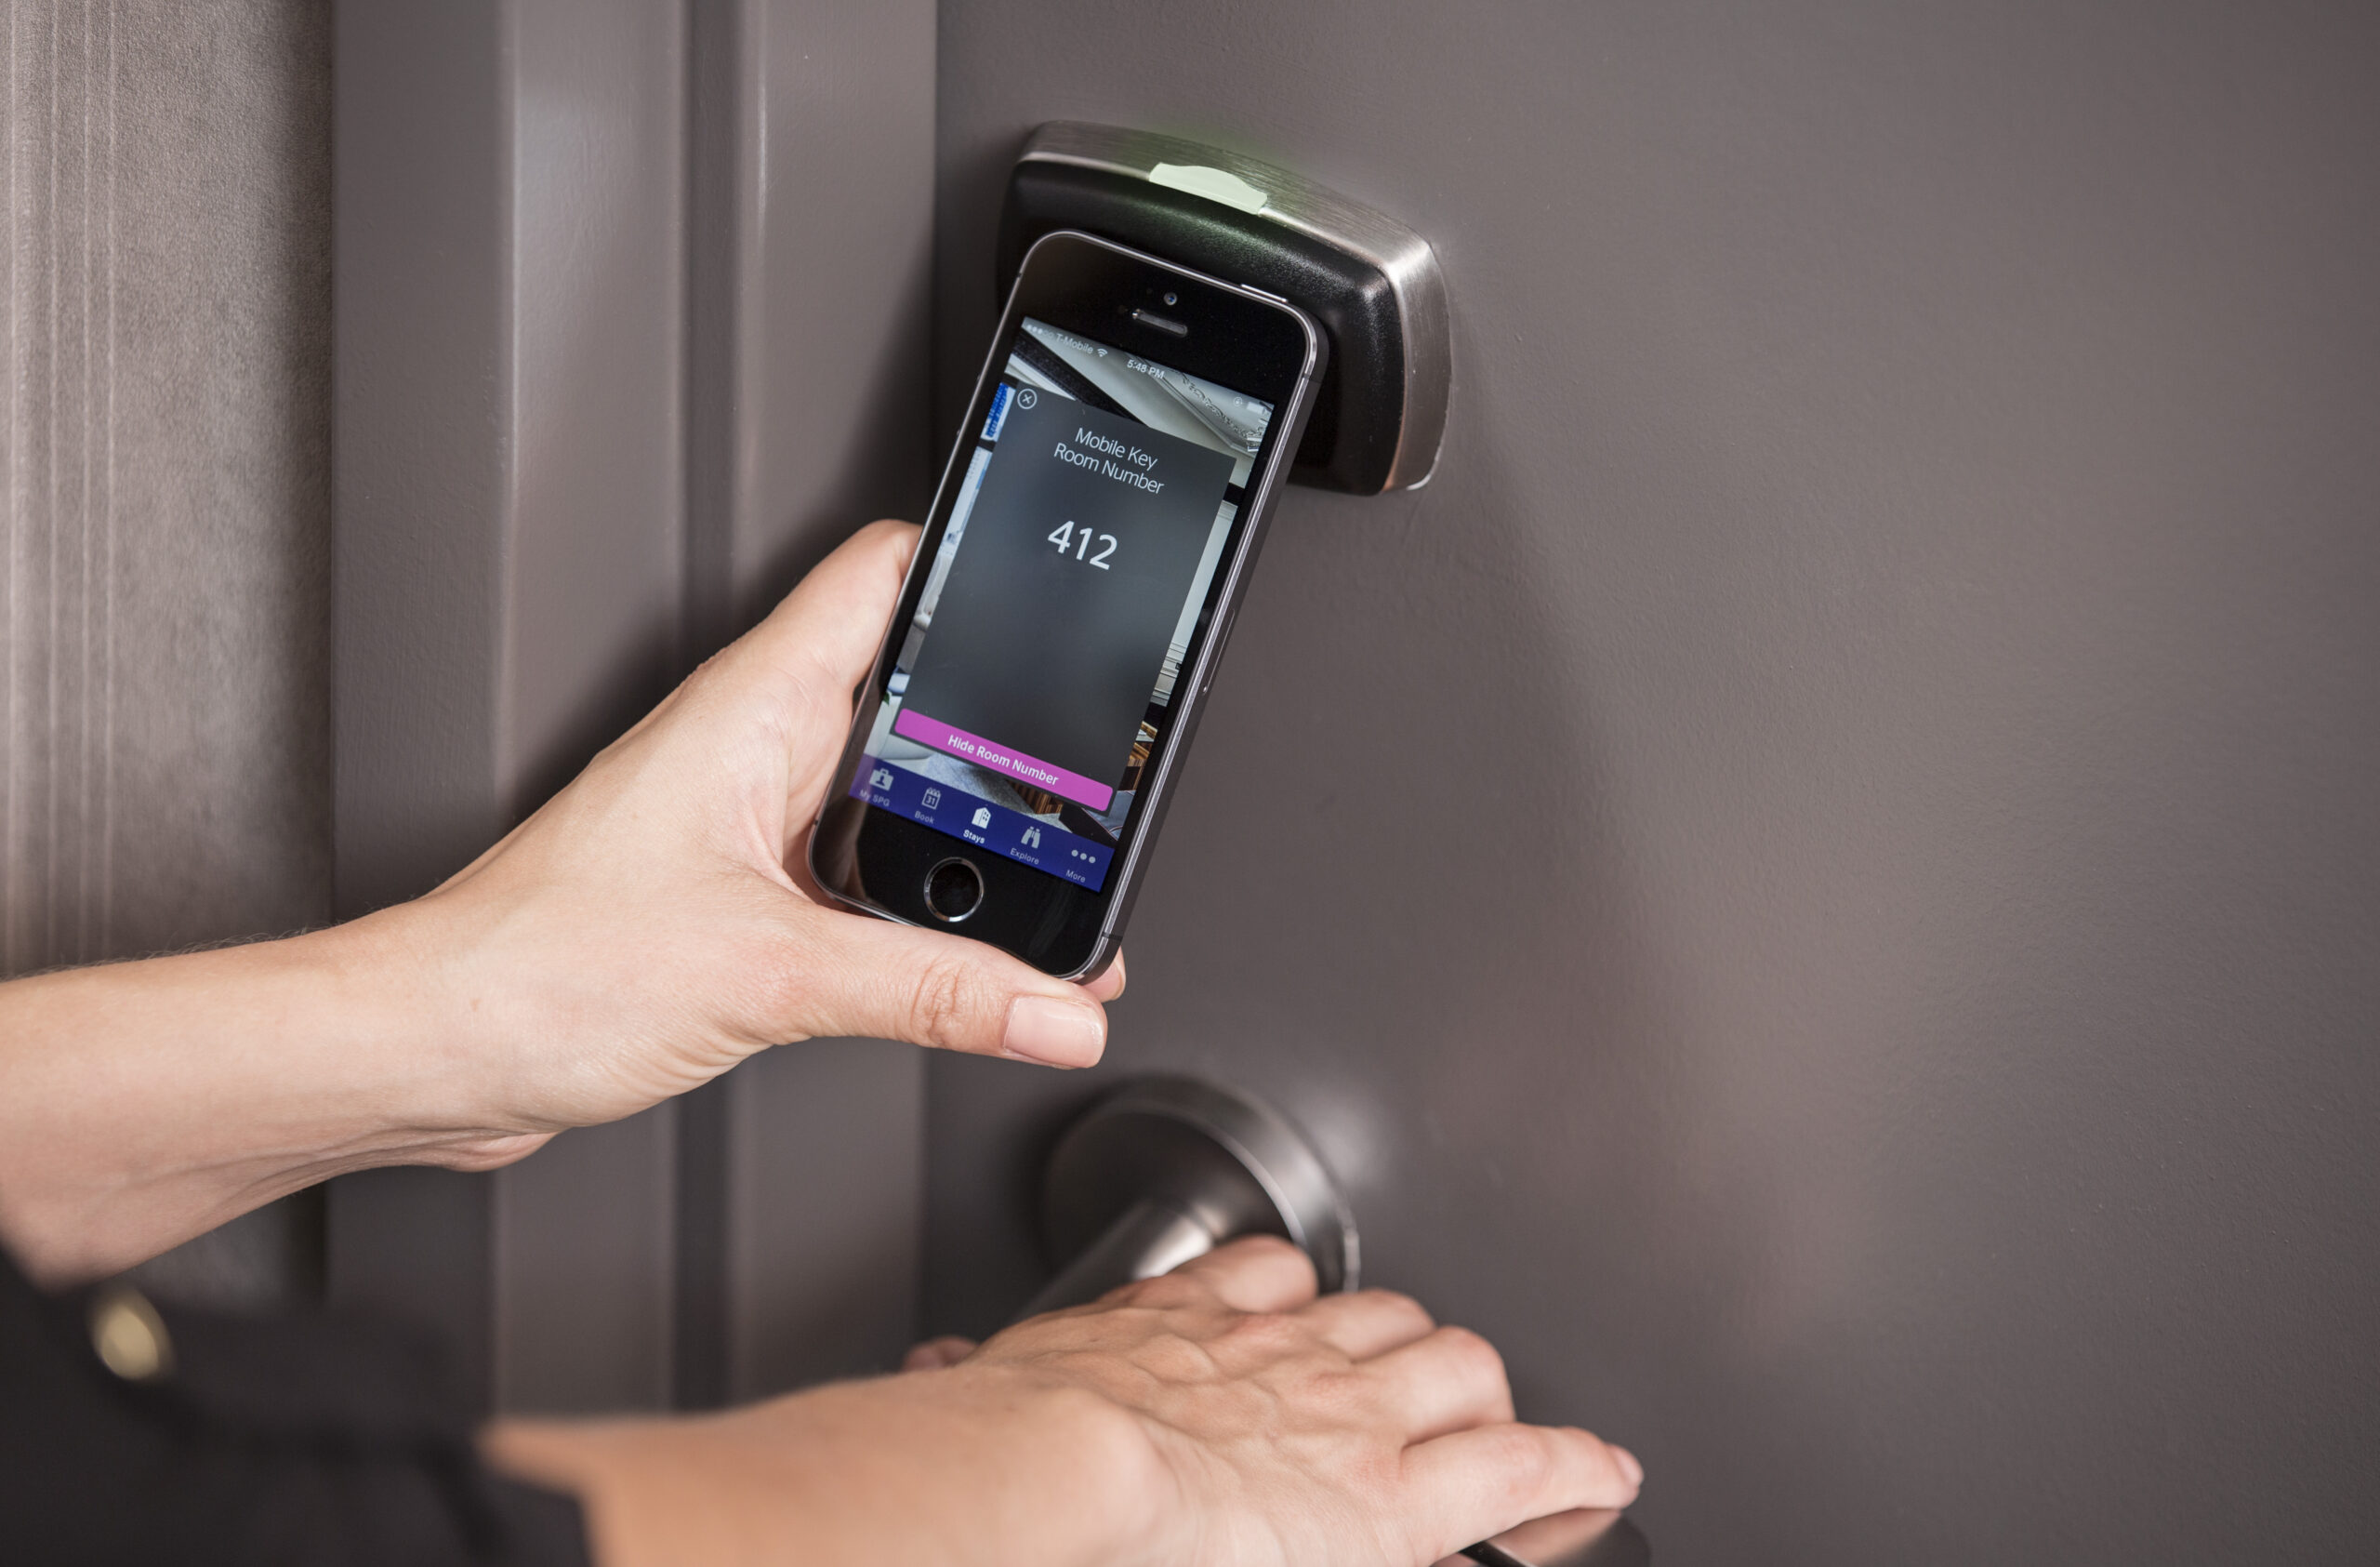 Starwood Hotels sends keys directly to guests' phones.